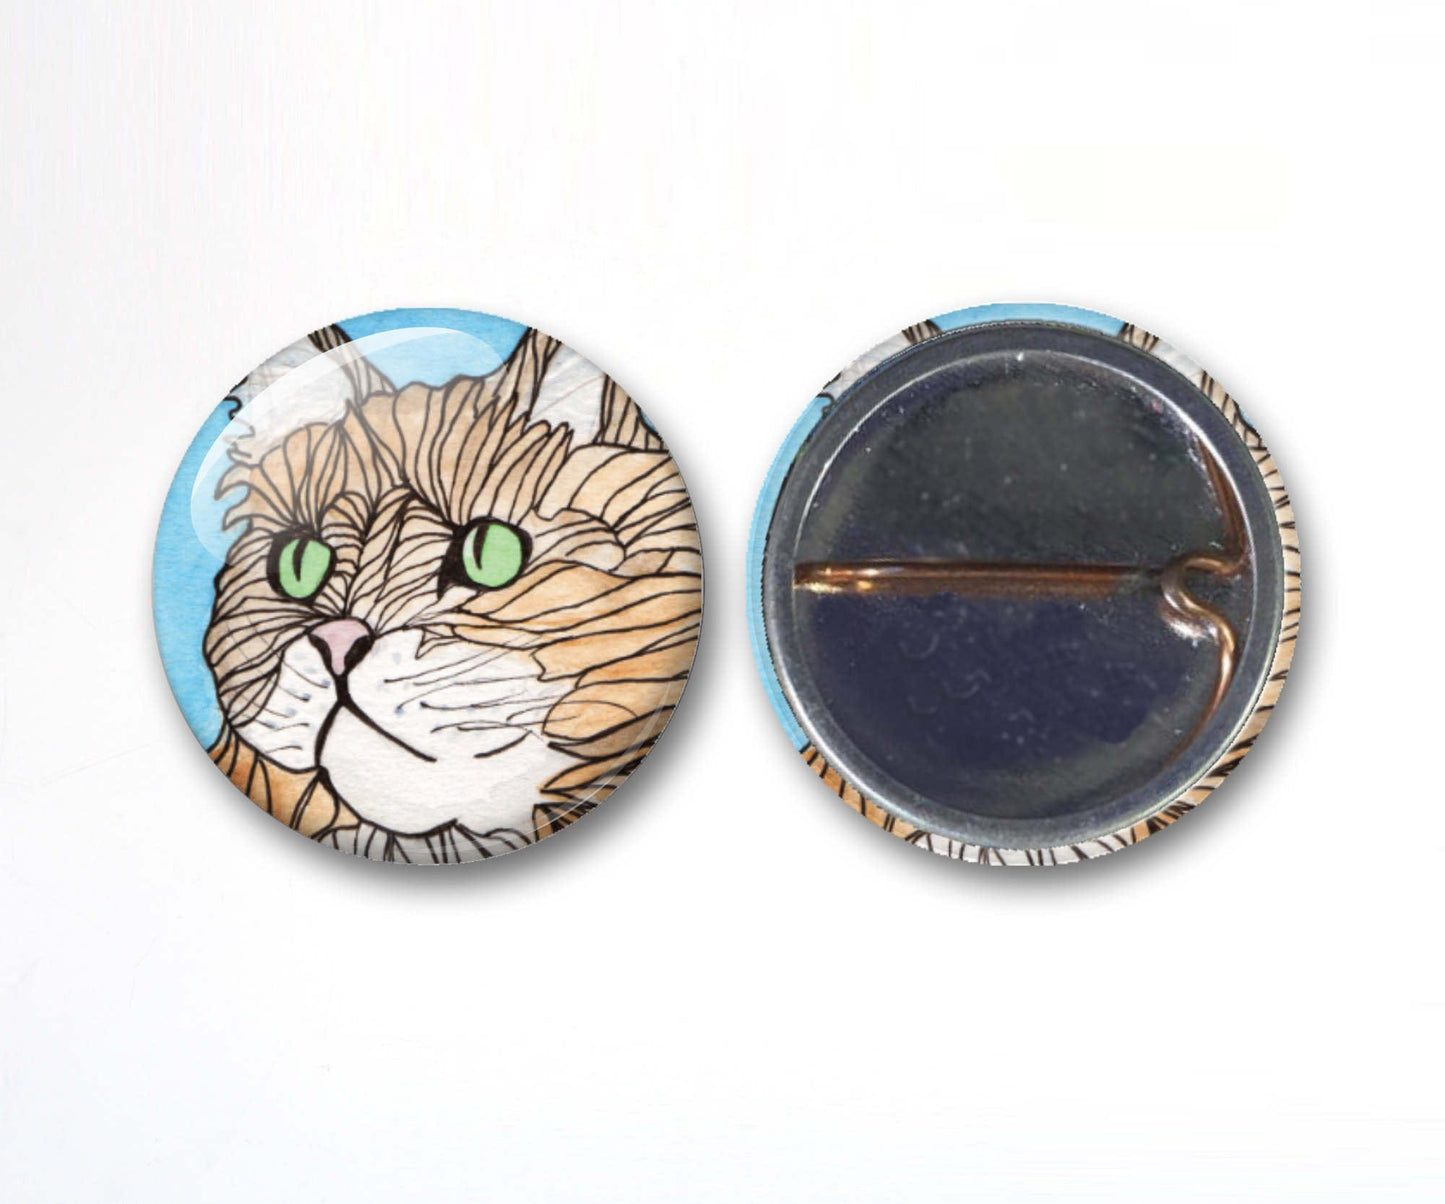 PinkPolish Design Buttons "Cuddly Cat" Button Pack, 3-Pack Pin Back Button, 1 Inch